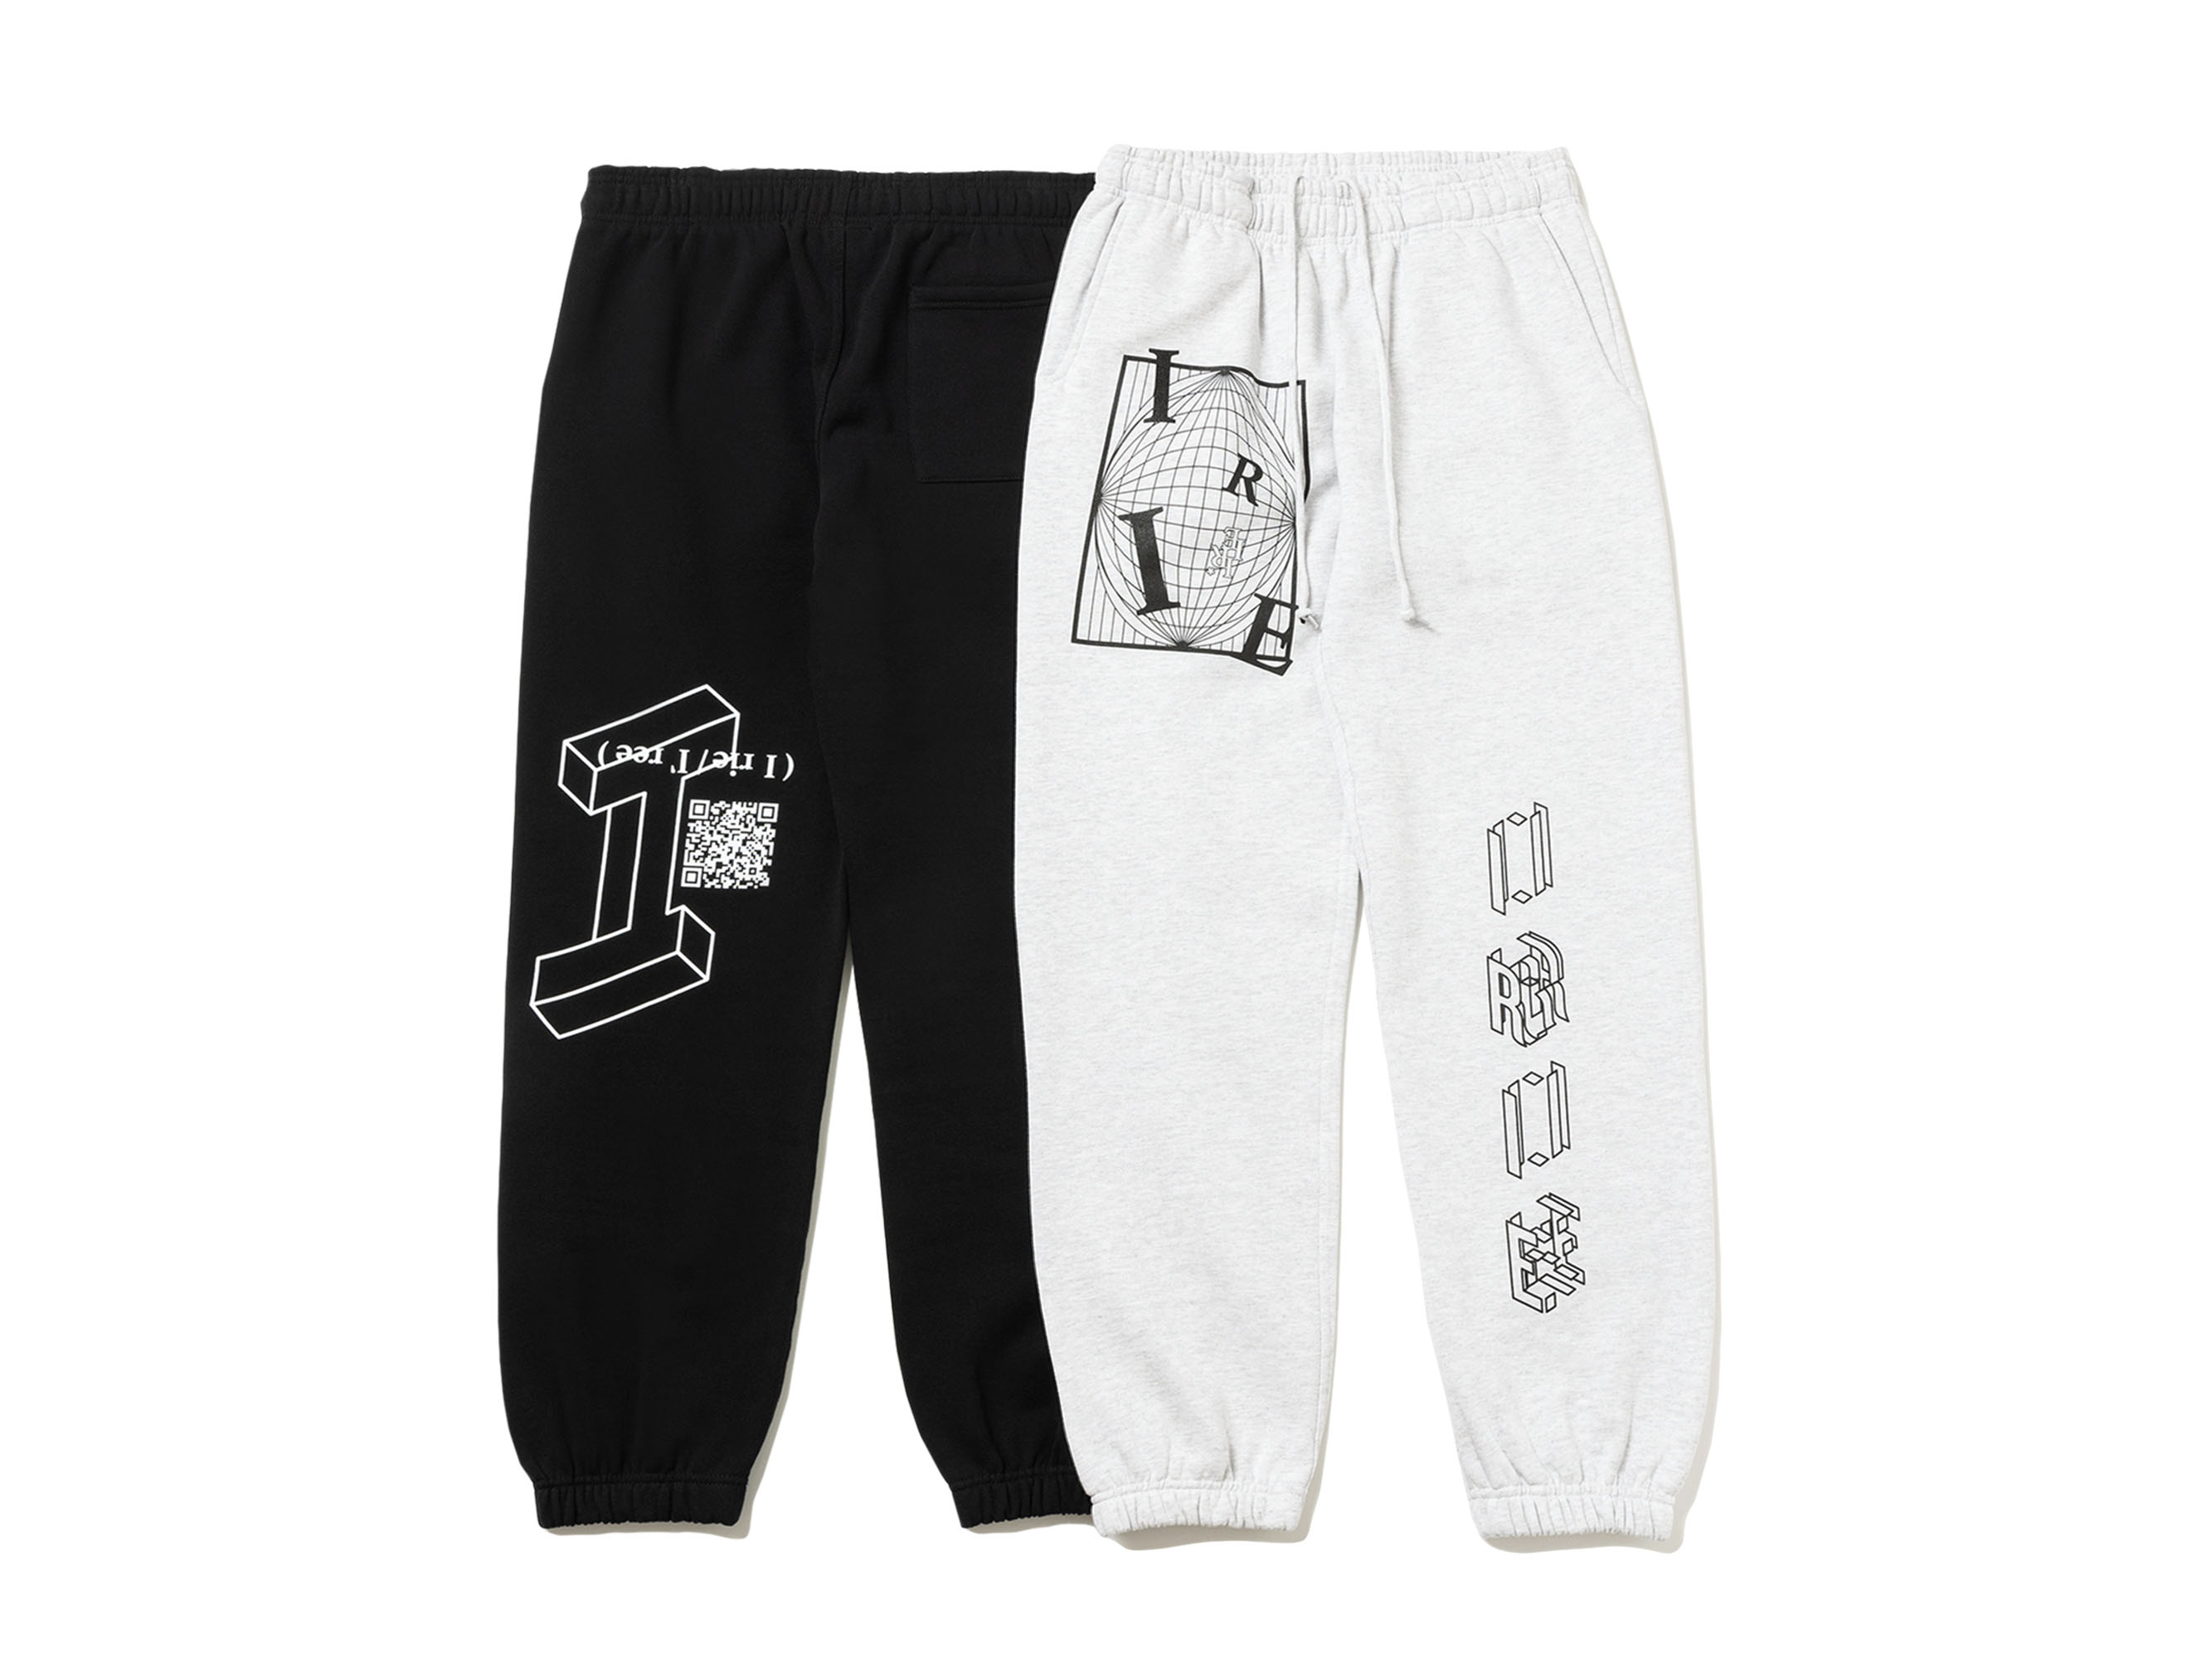 【40%OFF】OPTICAL ILLUSION SWEAT PANTS - IRIE by irielife